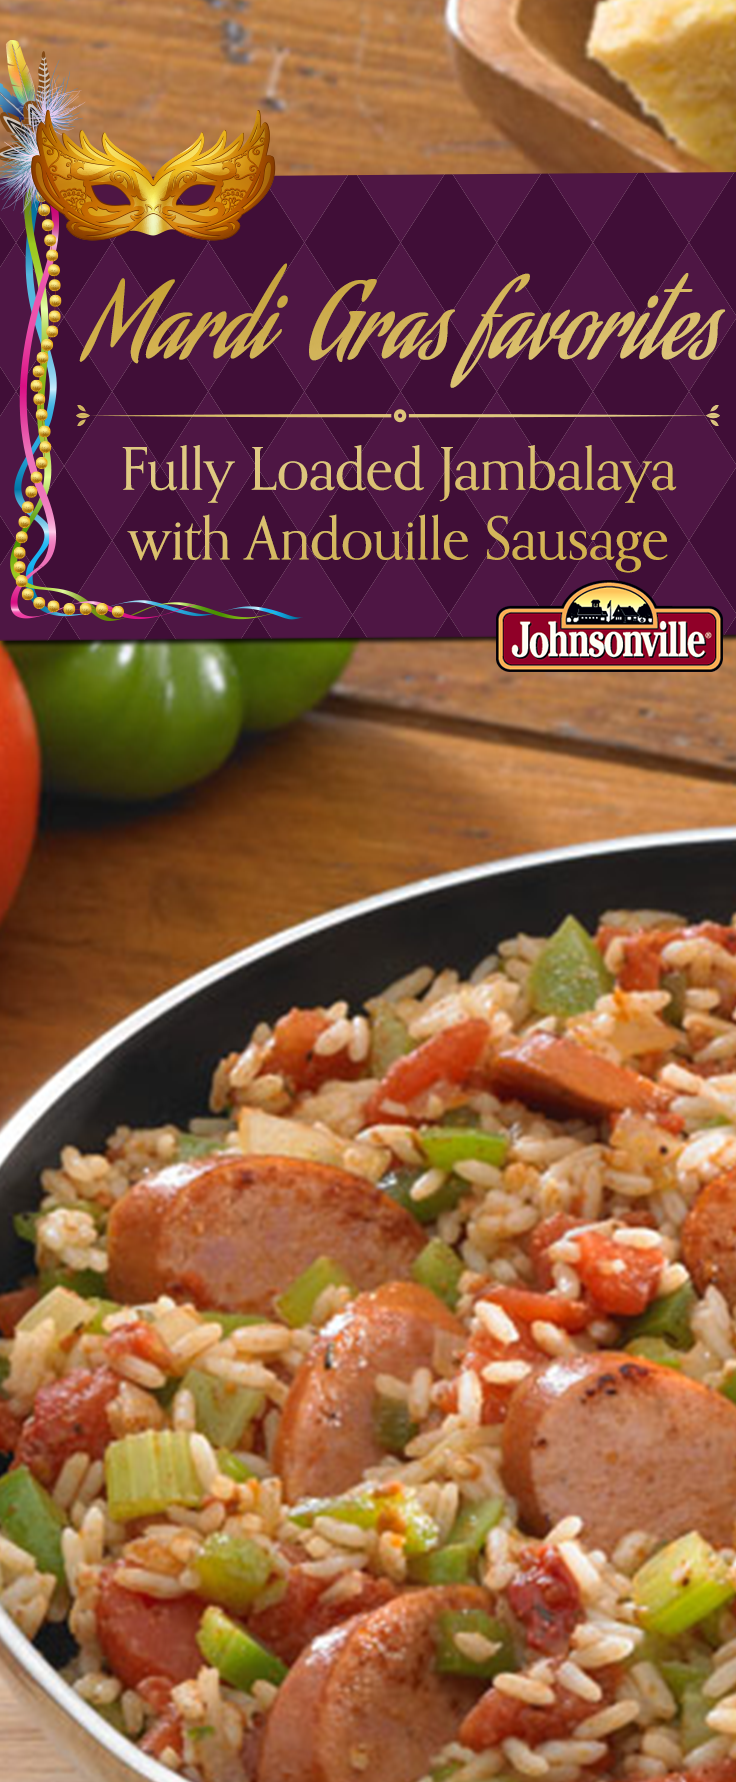 aidells chicken sausage cooking instructions